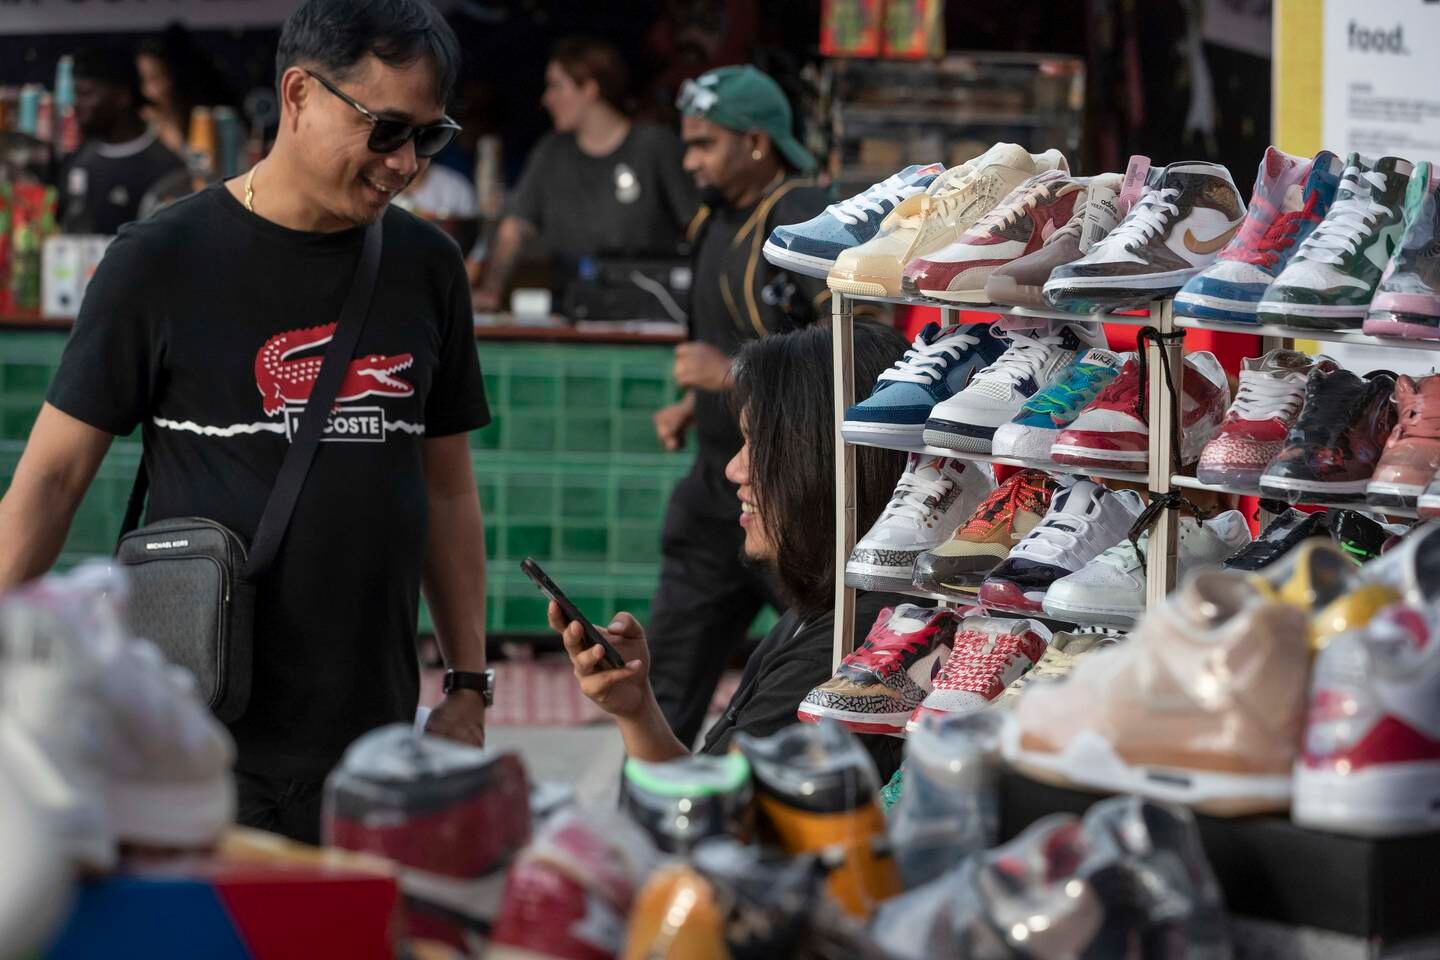 Sneaker culture is a mainstay of Sole DXB. Antonie Robertson / The National


